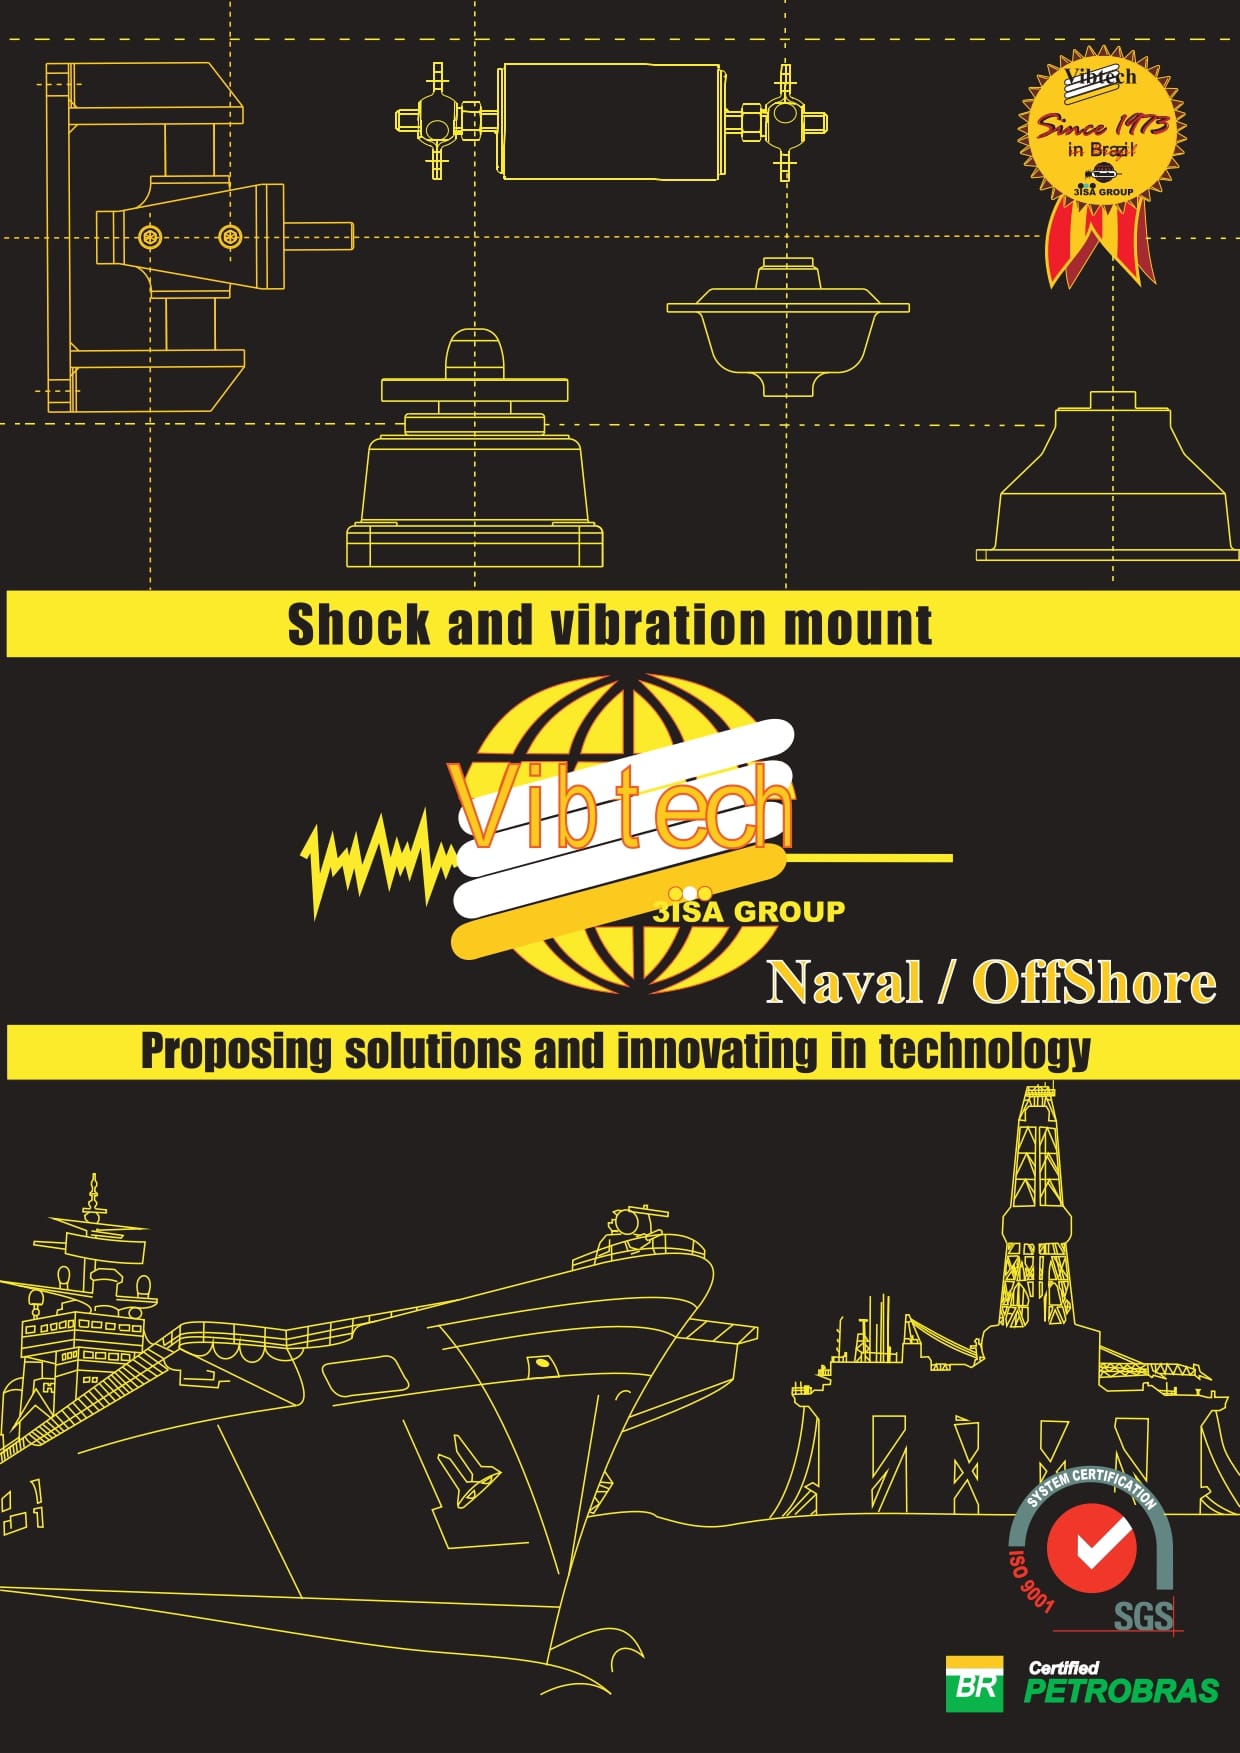 Naval - Offshore I